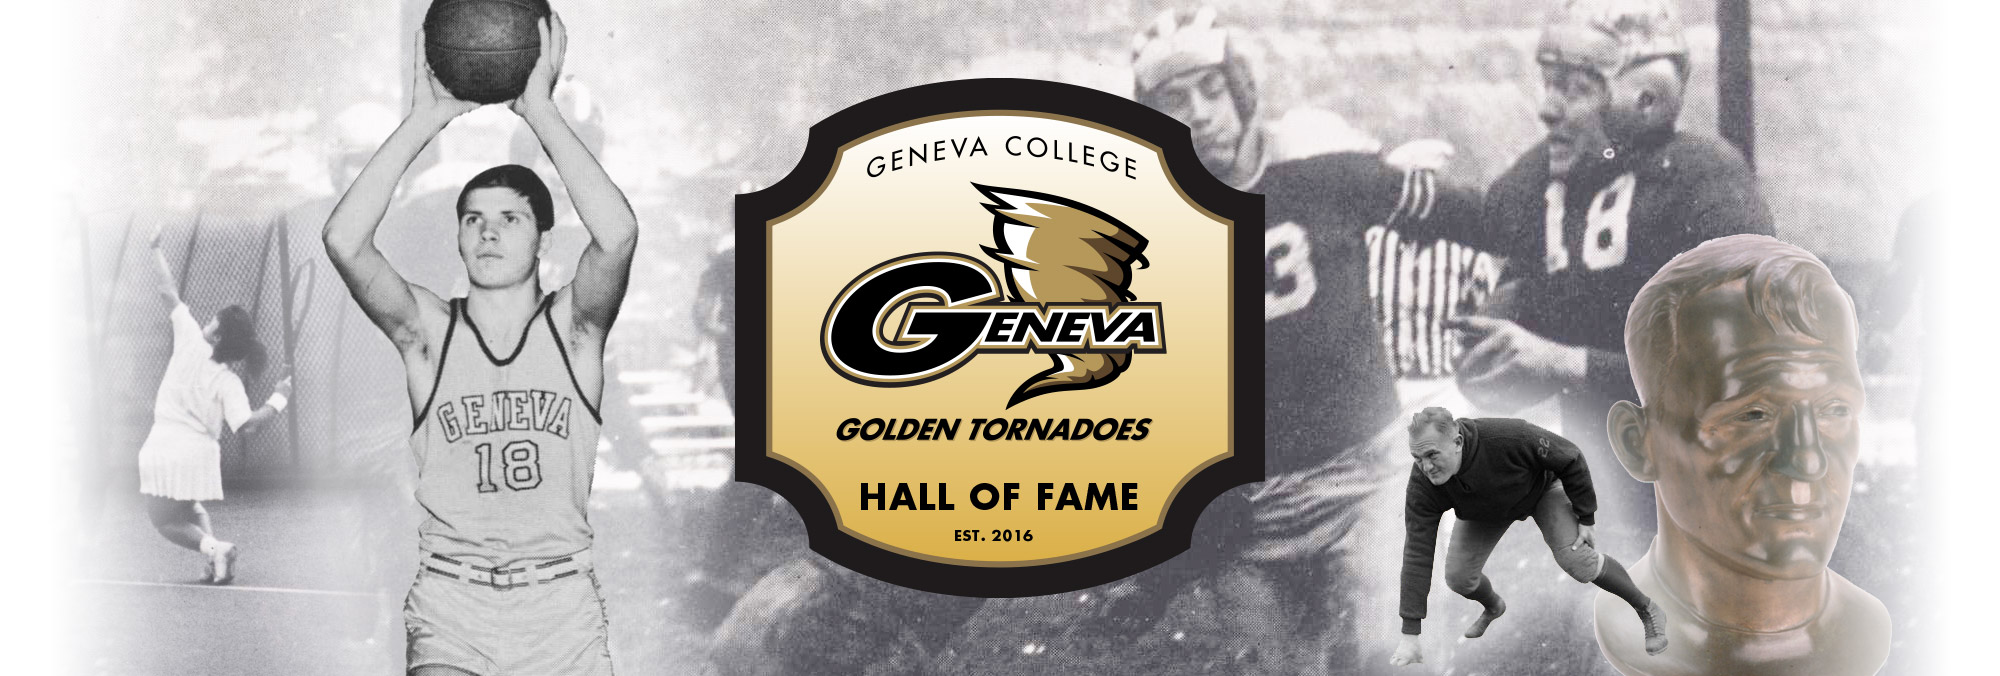 Geneva Hall of Fame Nominations Open